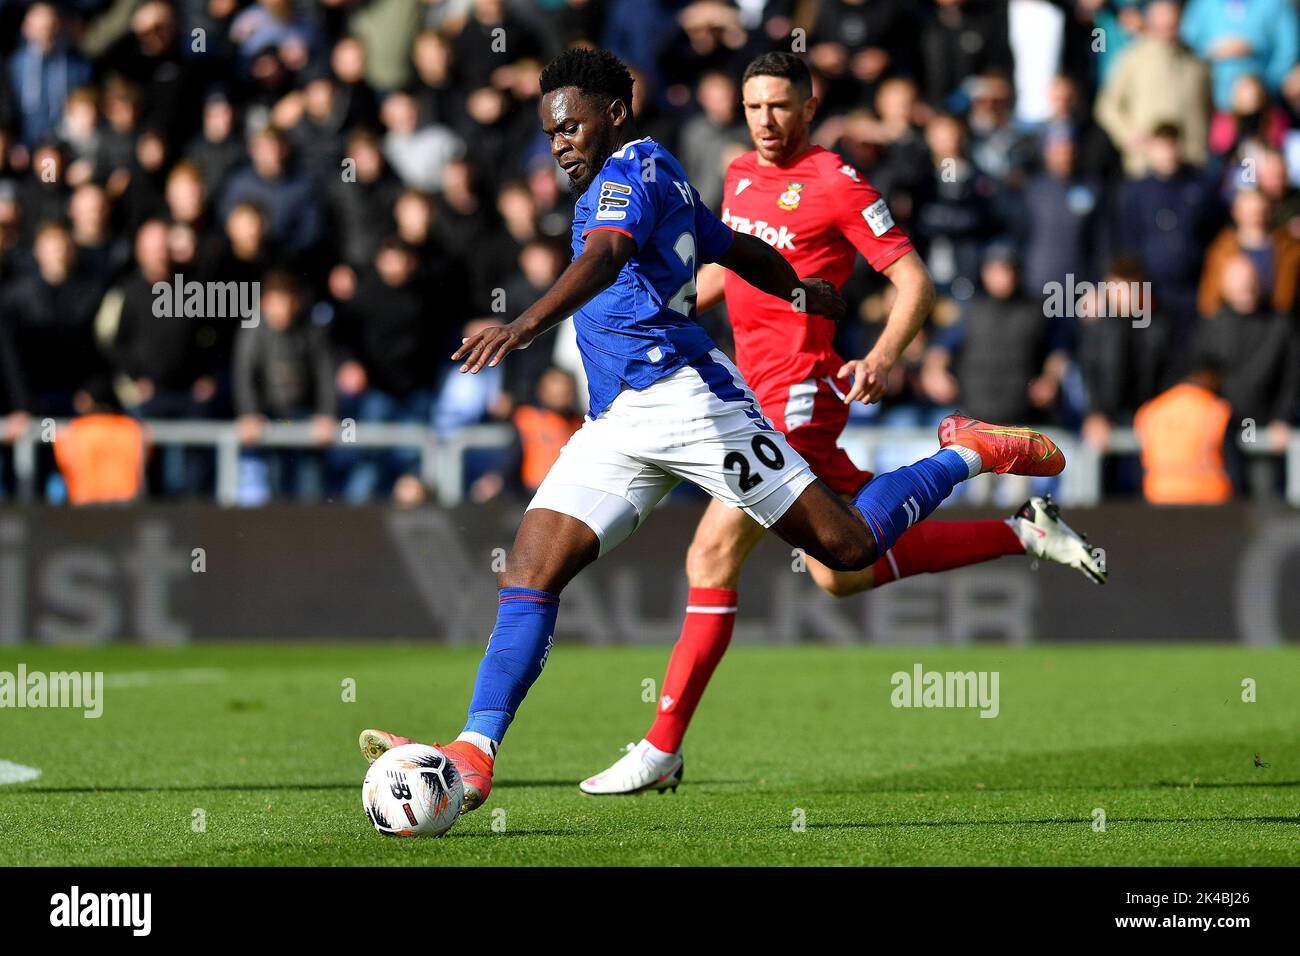 Oldham, UK. 1st October 2022during the Vanarama National League match between Oldham Athletic and Wrexham at Boundary Park, Oldham on Saturday 1st October 2022Mike Fondop-Talom of Oldham Athletic scores his side's first goal of the game during the Vanarama National League match between Oldham Athletic and Wrexham at Boundary Park, Oldham on Saturday 1st October 2022 during the Vanarama National League match between Oldham Athletic and Wrexham at Boundary Park, Oldham on Saturday 1st October 2022. Credit: MI News & Sport /Alamy Live News Stock Photo